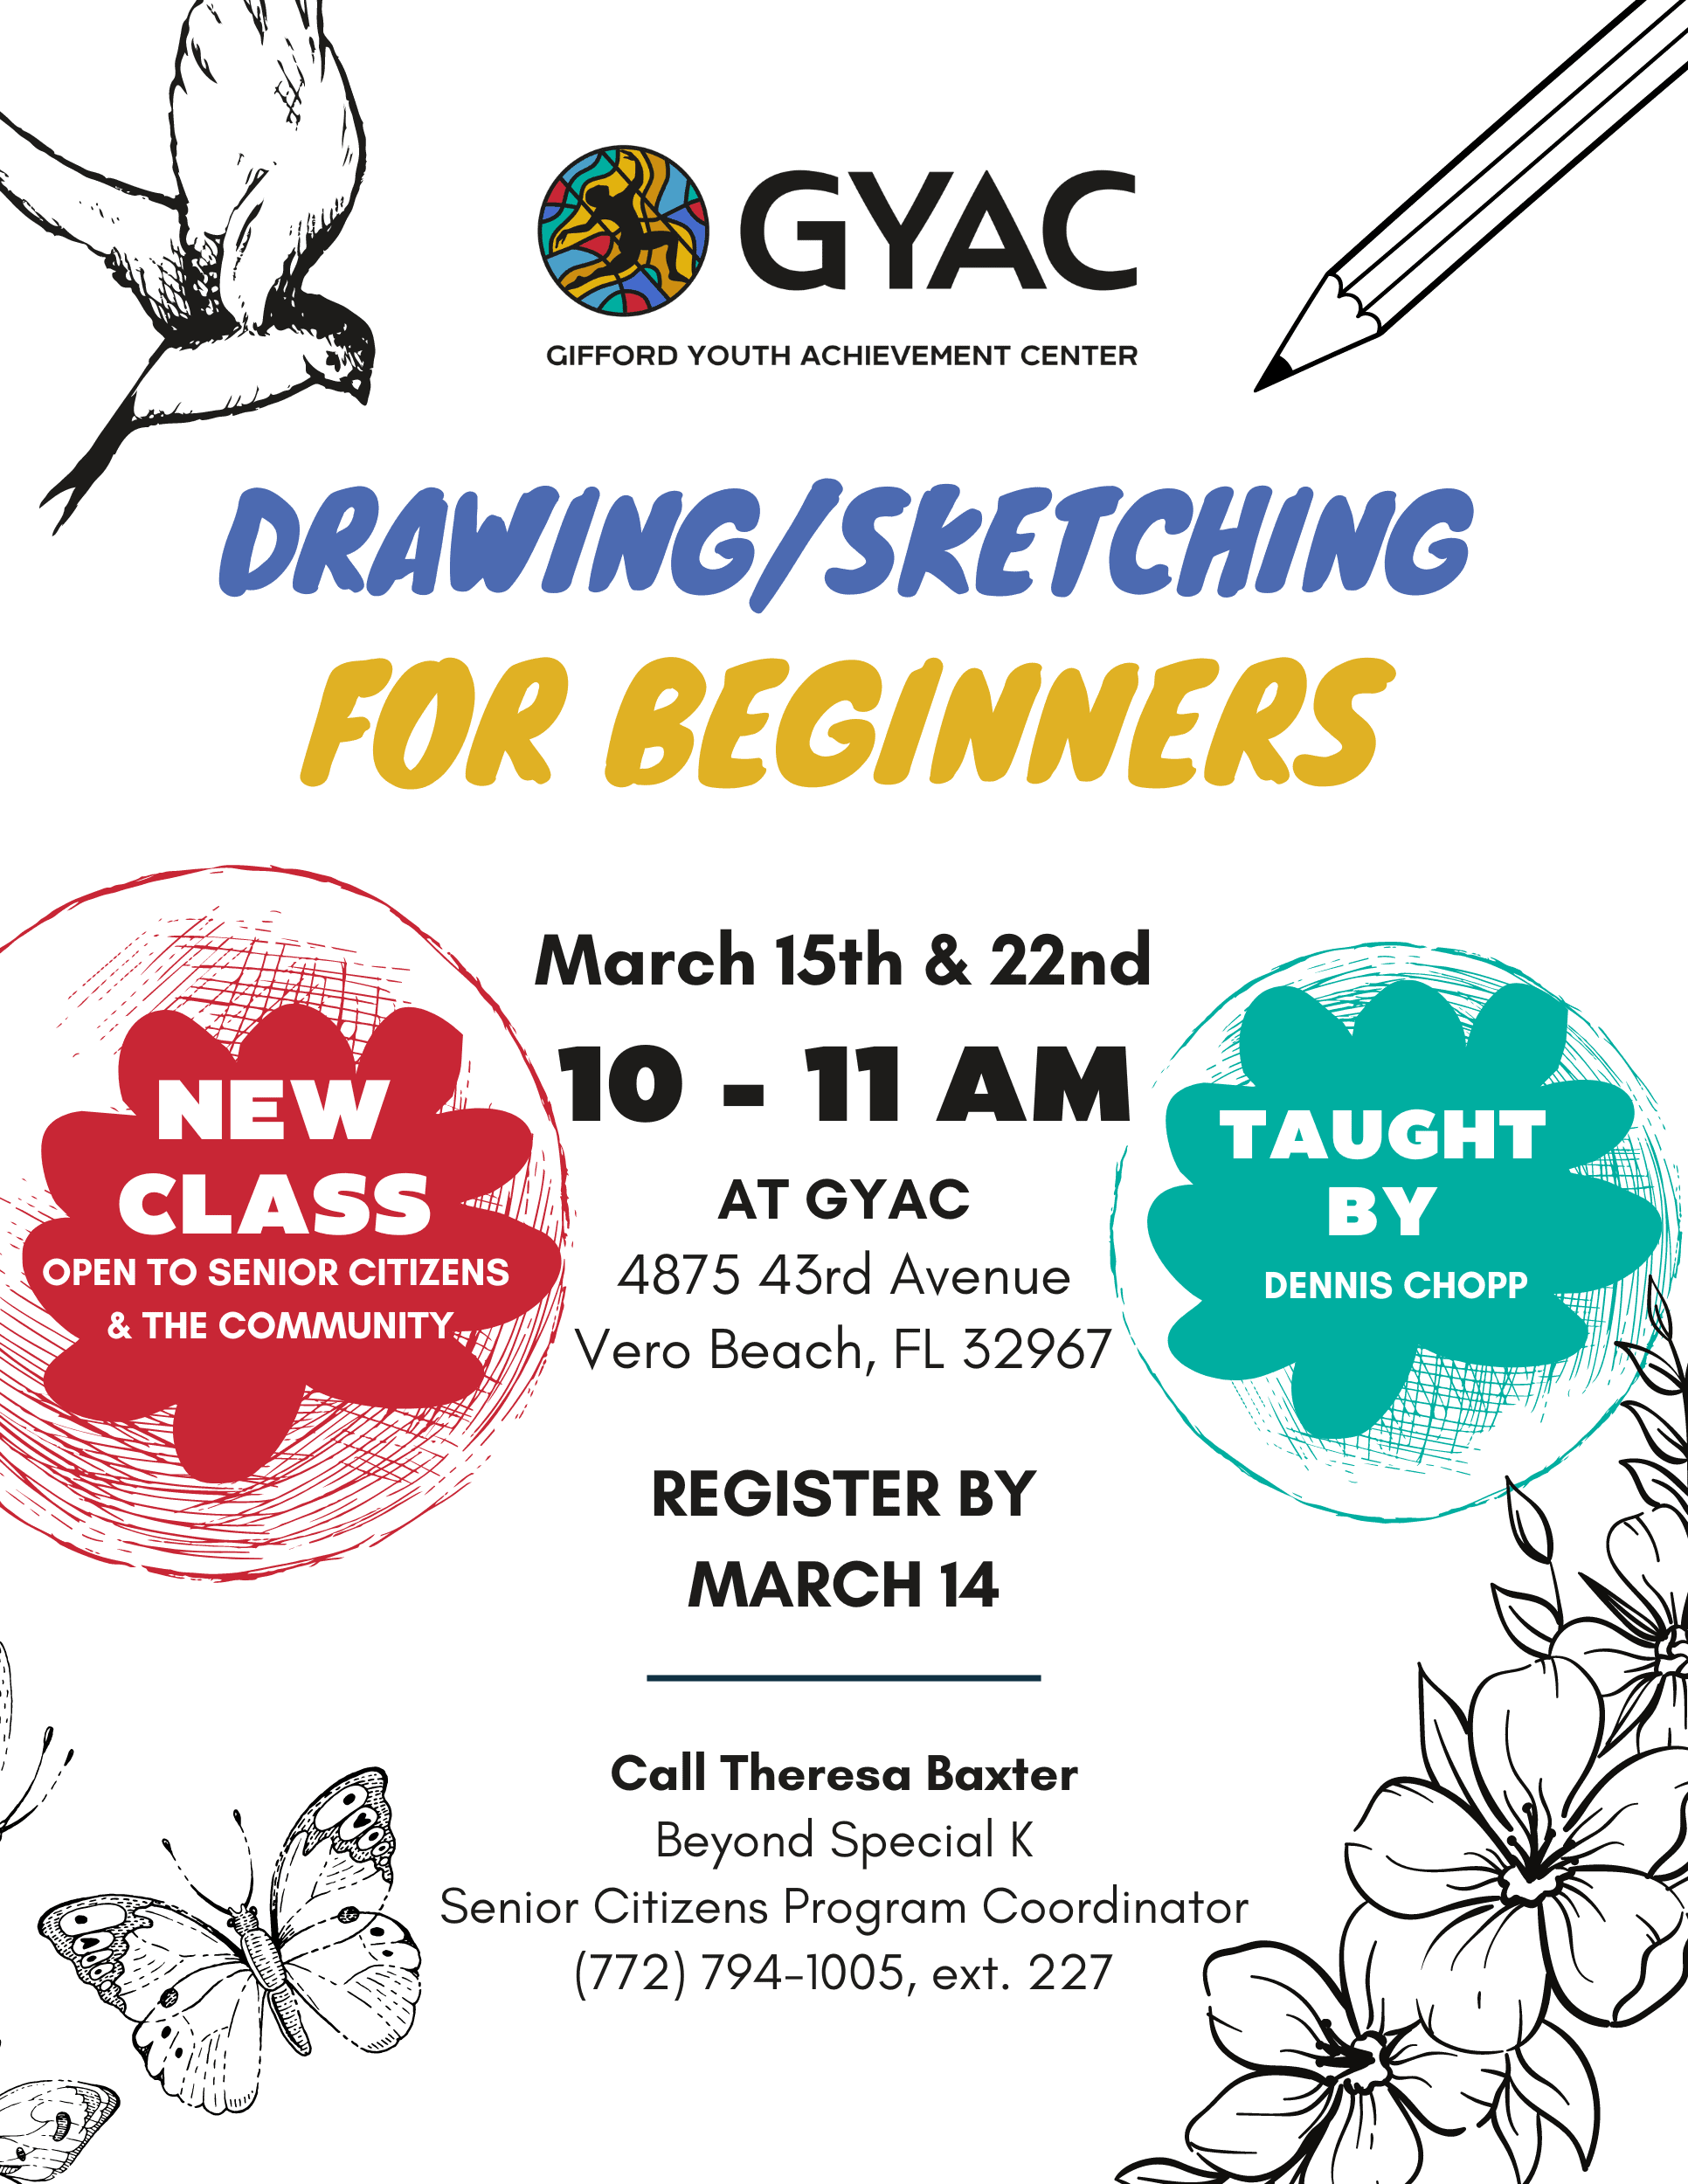 Flyer with details of the GYAC's Beyond Special K Program's Drawing/Sketching Class for Beginners on March 15 and March 22, 2024.